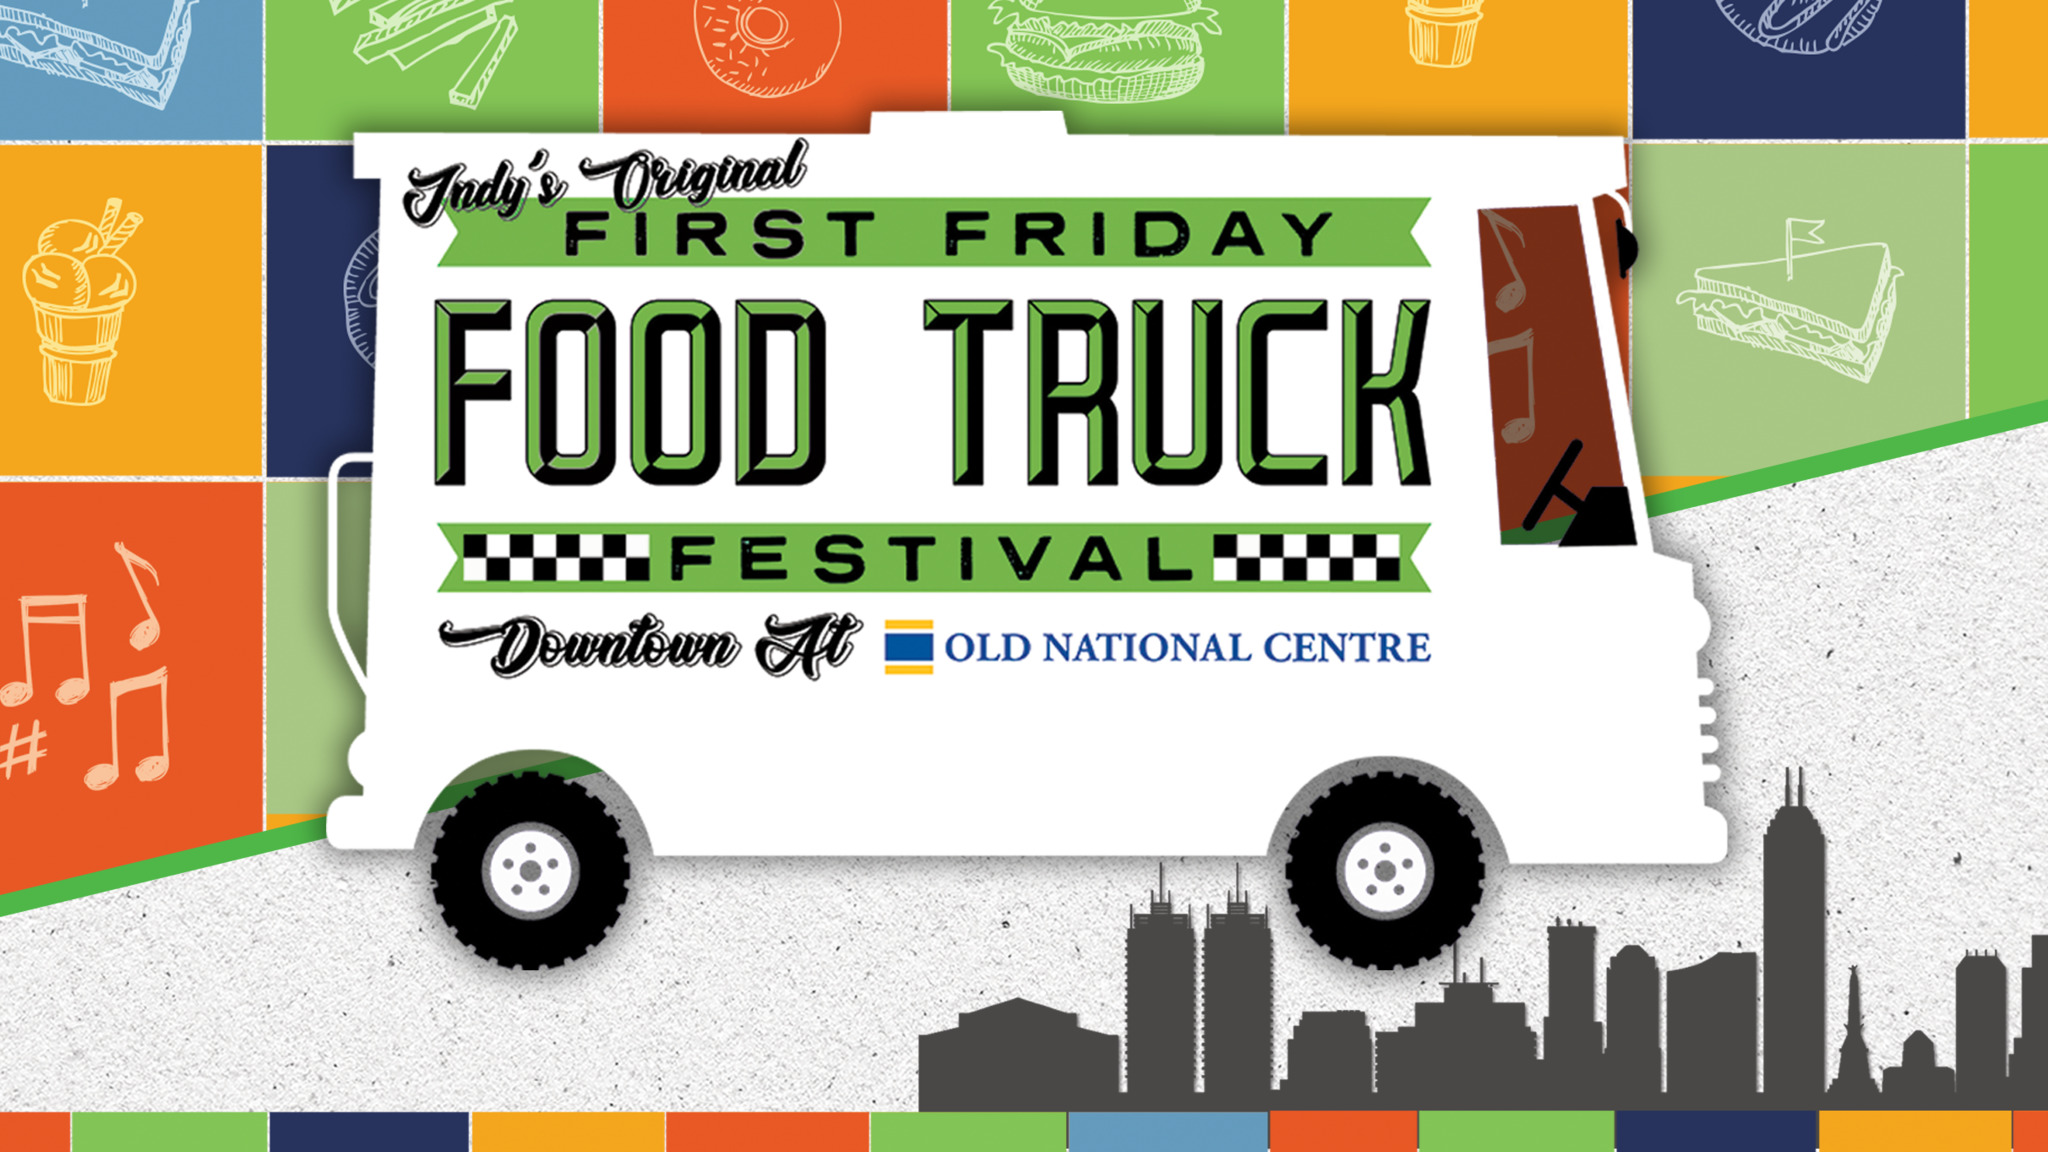 First Friday Food Truck Fest Tickets Event Dates & Schedule